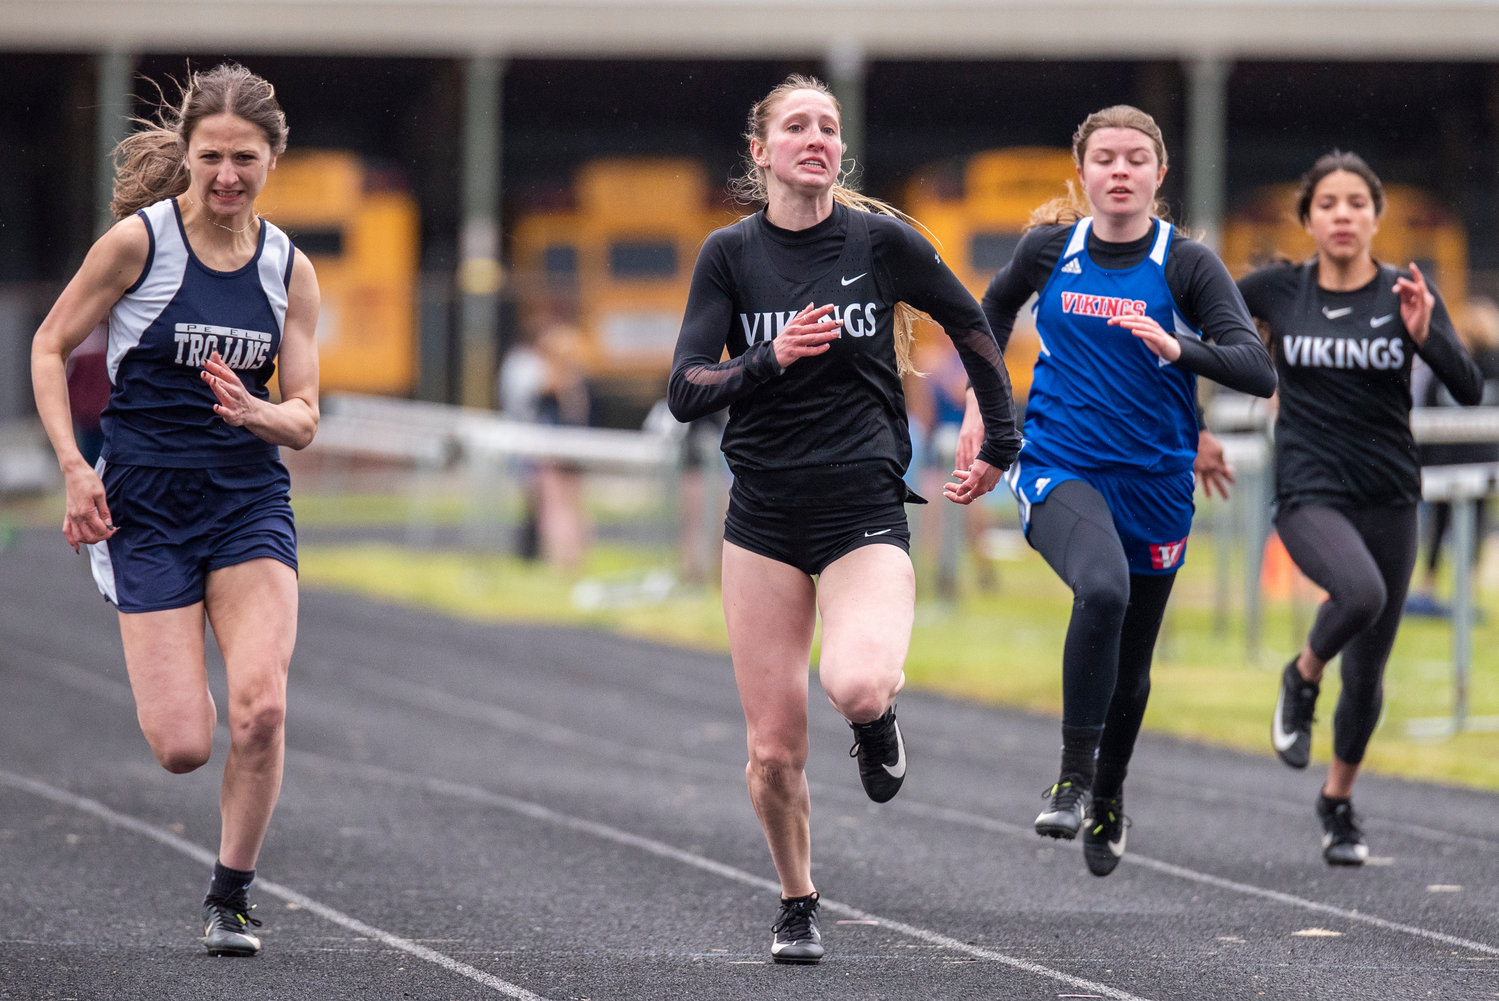 Mossyrock's Teaguen Weise, second from left, leads the pack in the 100-meter dash, with Pe Ell's Charlie Carper, left, in hot pursuit. Weise won the event and Carper placed second.